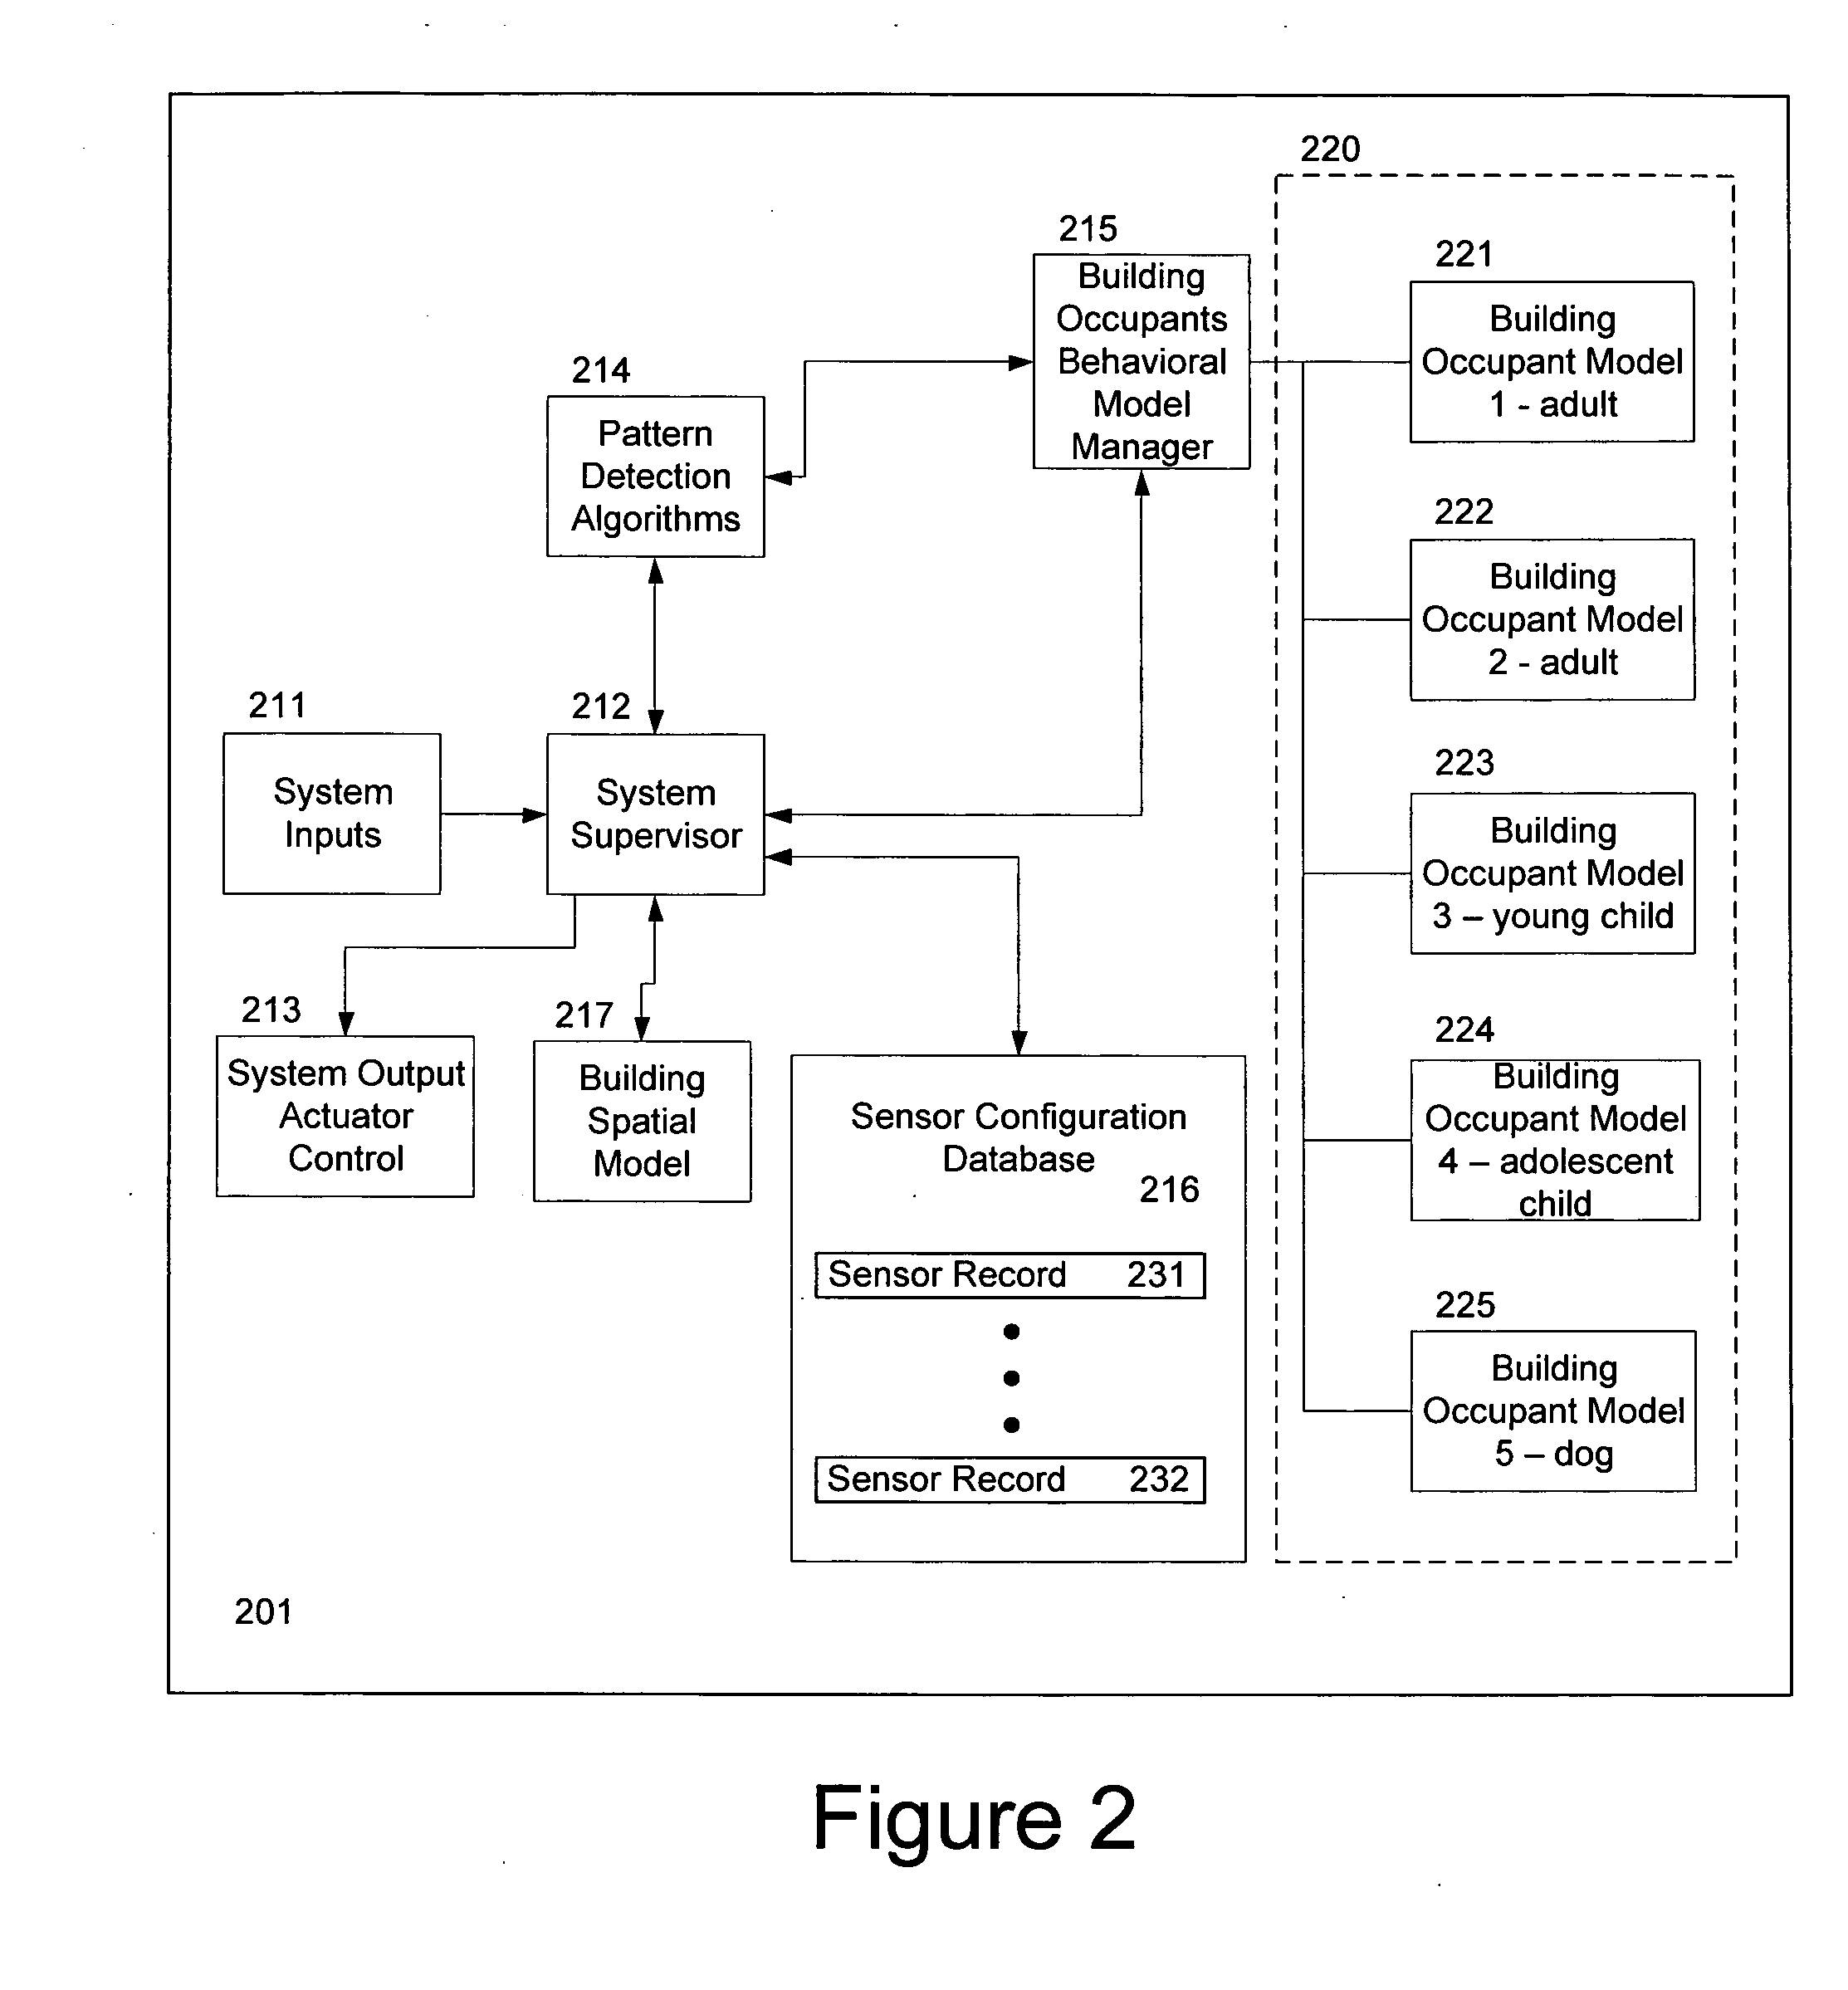 System for controlling HVAC and lighting functionality